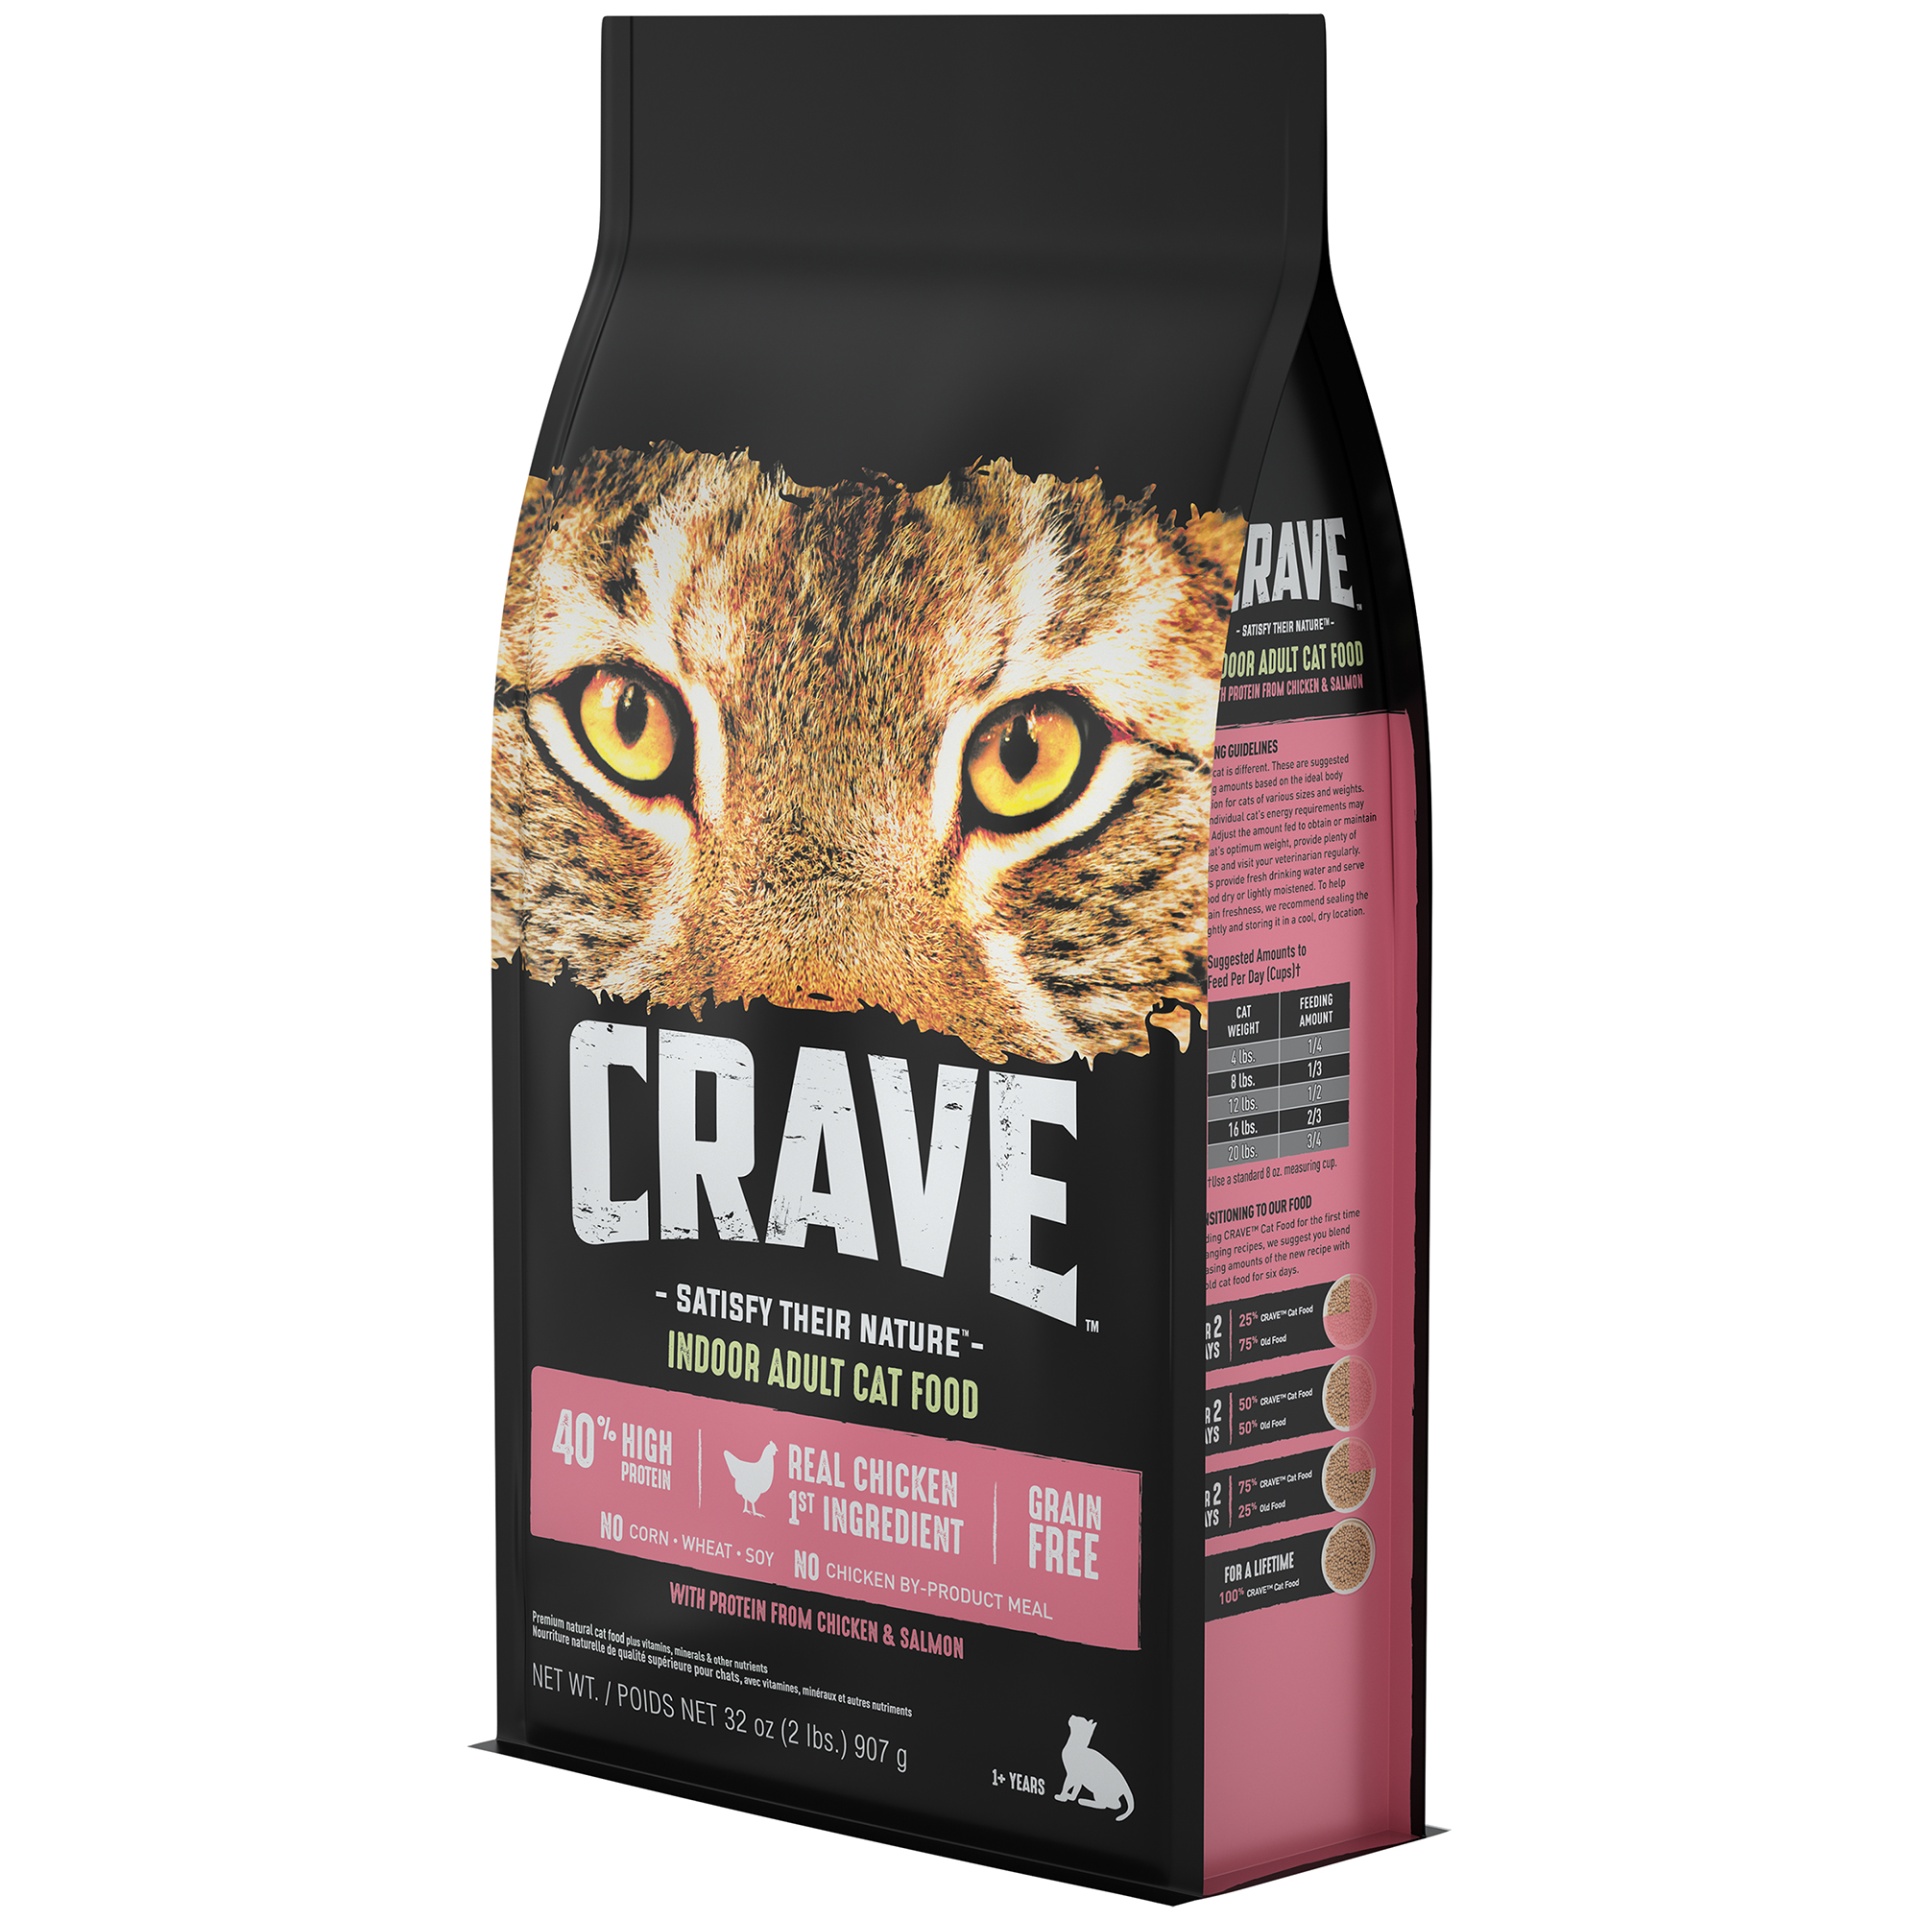 CRAVE Grain Free Indoor Adult High Protein Natural Dry Cat Food with